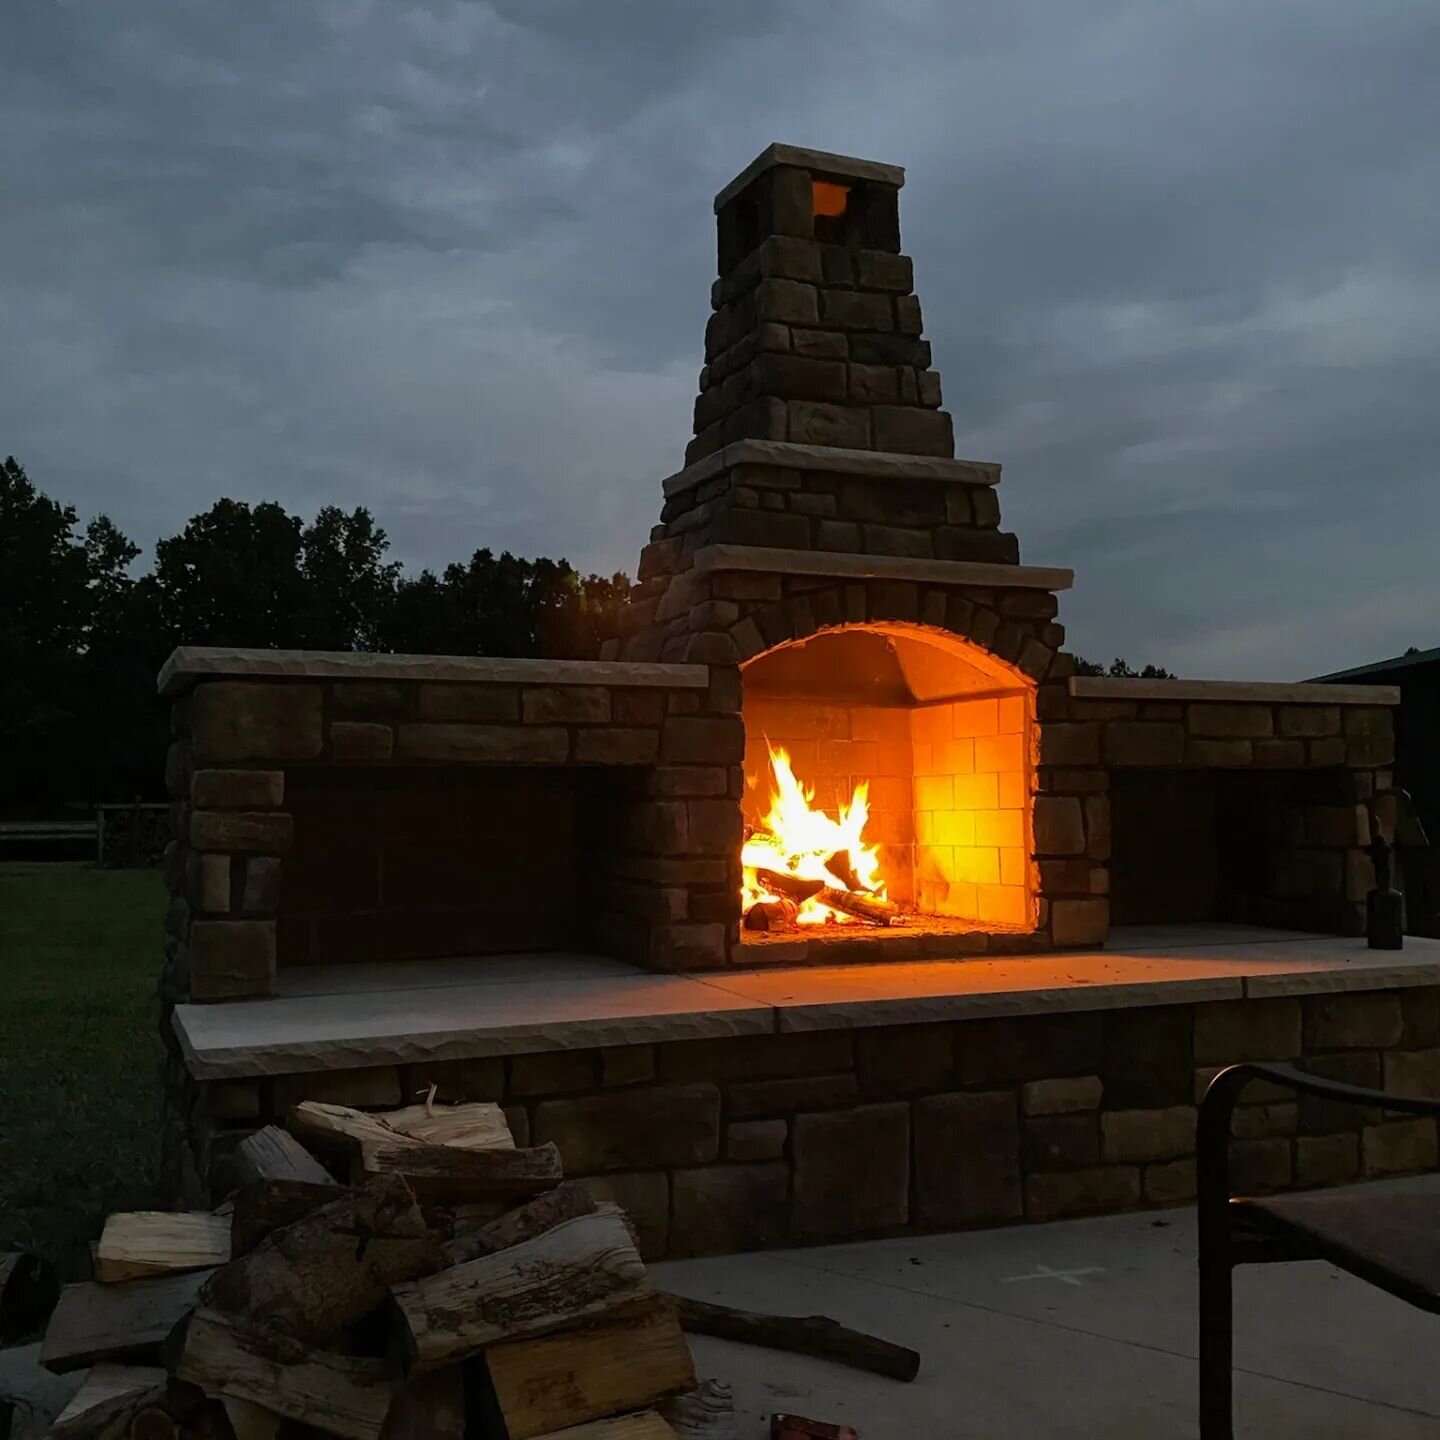 This is the process of building a custom outdoor fireplace. The finished product goes great with a beer and s'mores